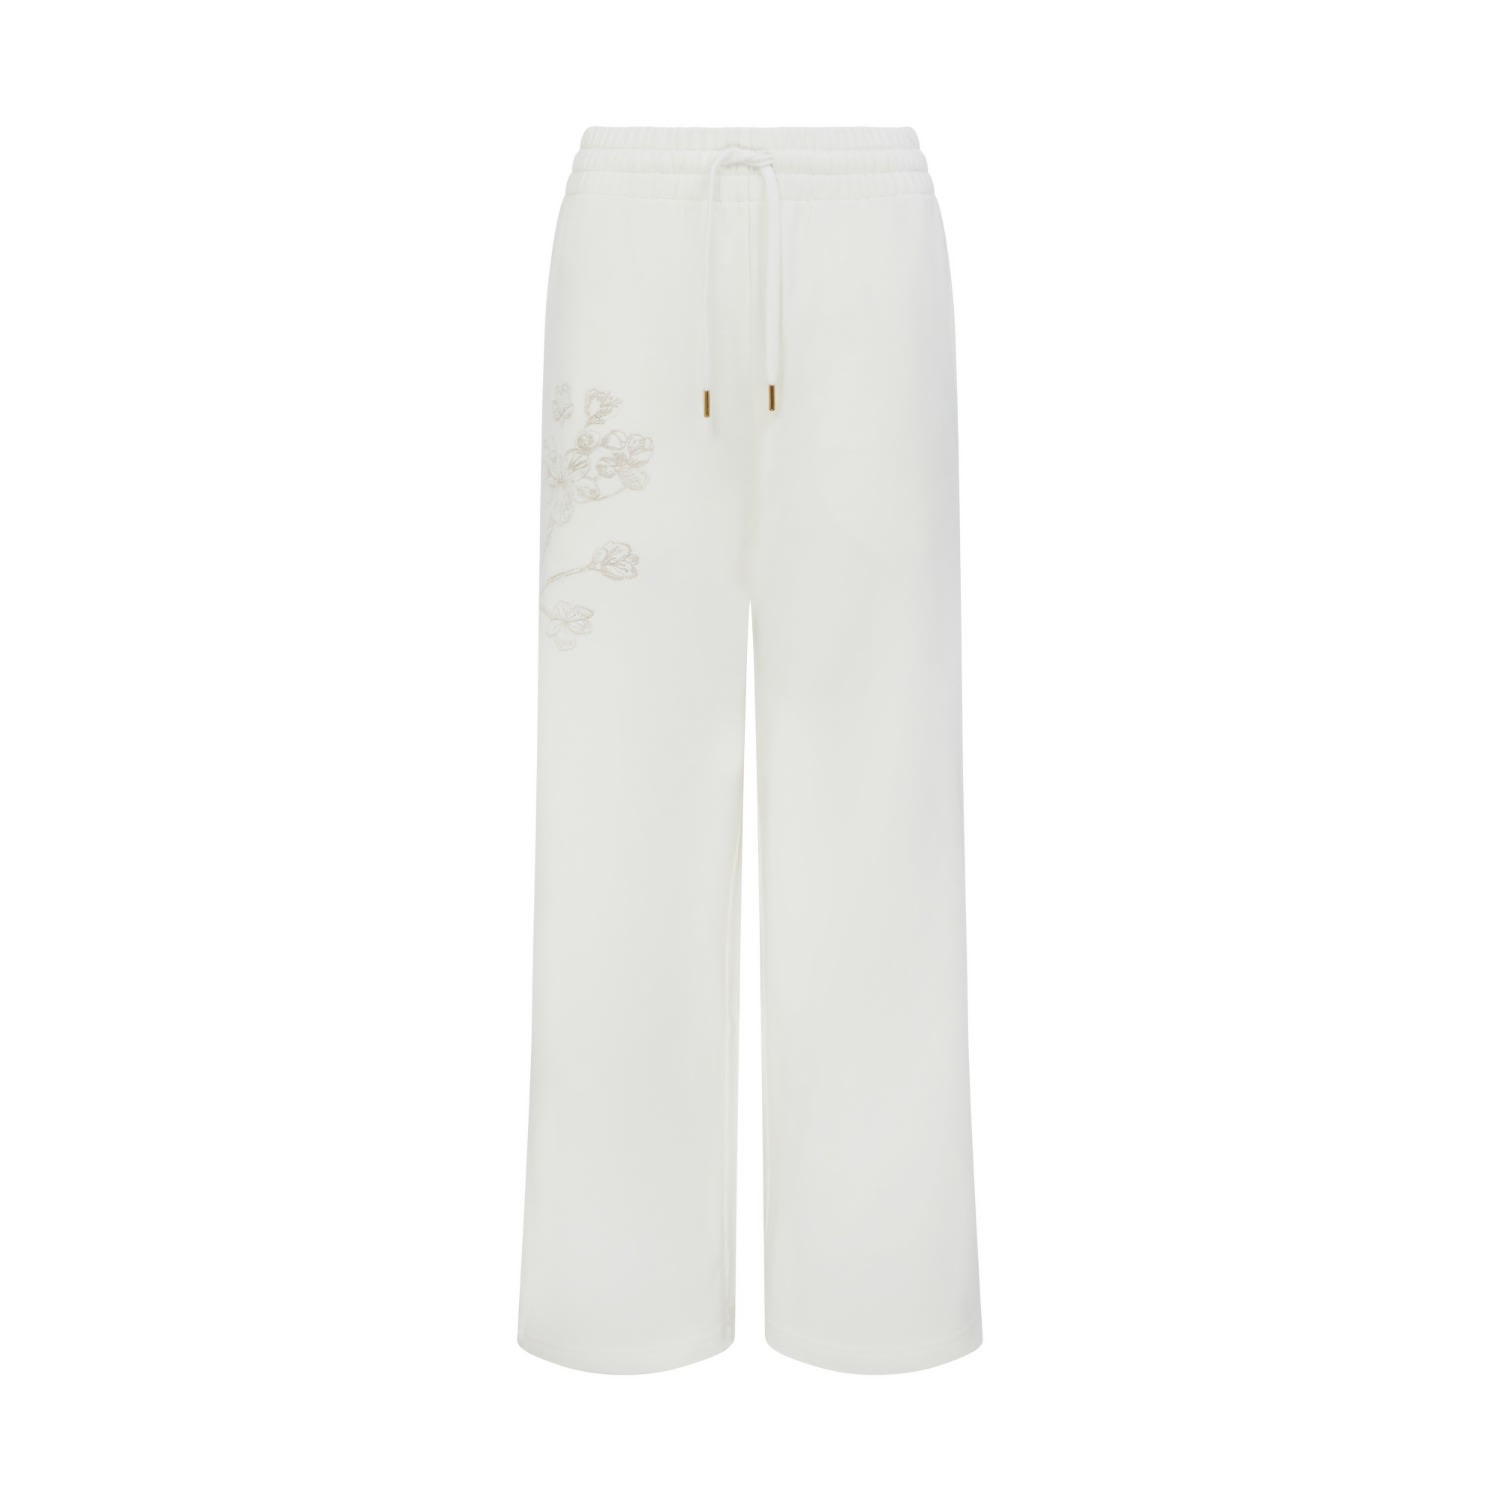 Peachaus Women's Sitka Blossom-embroidered Cotton Joggers - Moonlight White